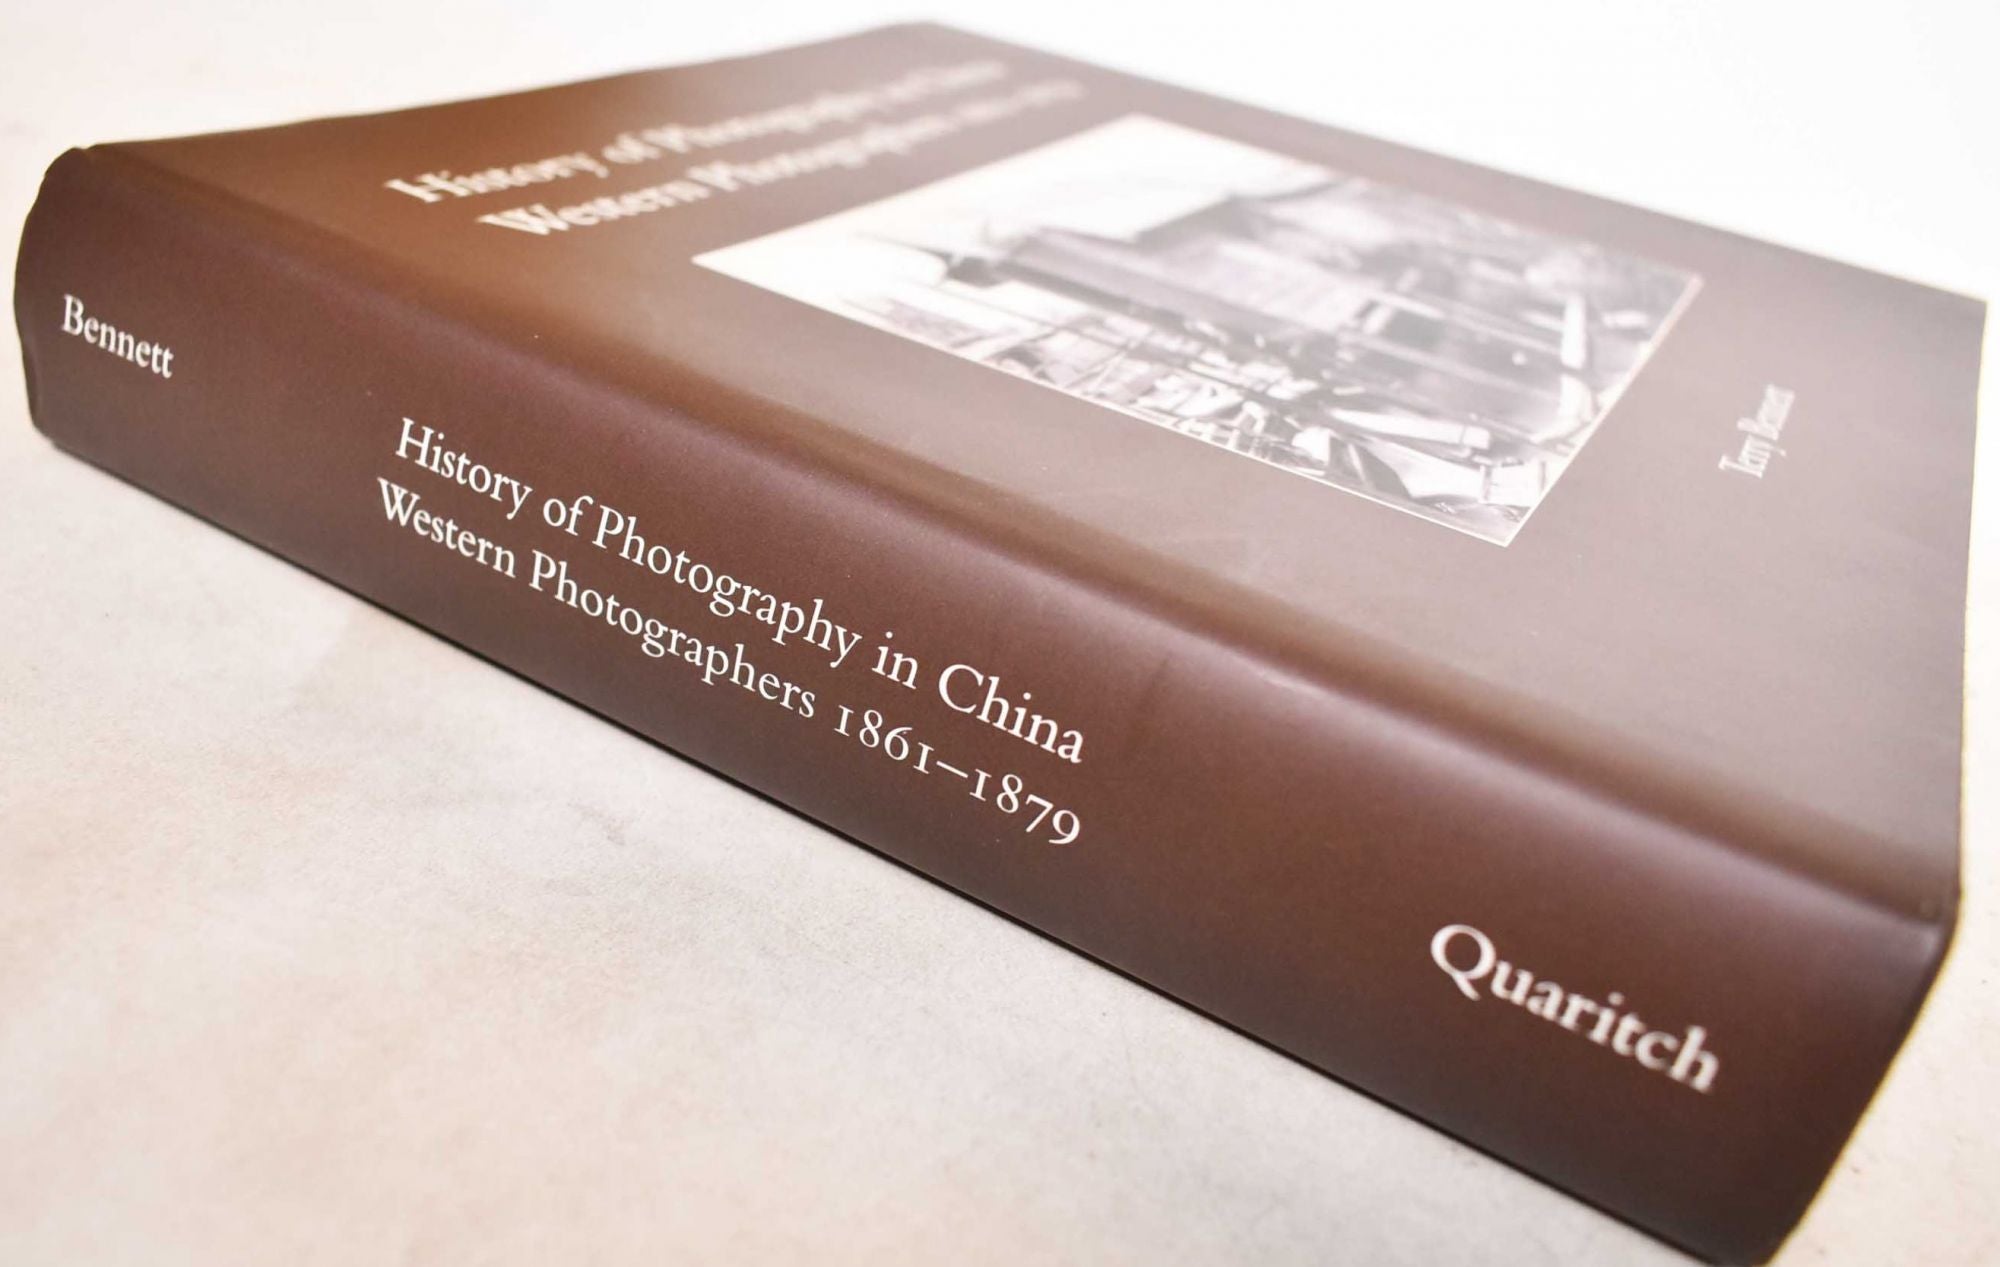 History of Photography in China : Western Photographers, 1861-1879 by Terry  Bennet, Anthony Payne, Lindsey Stewart on Mullen Books